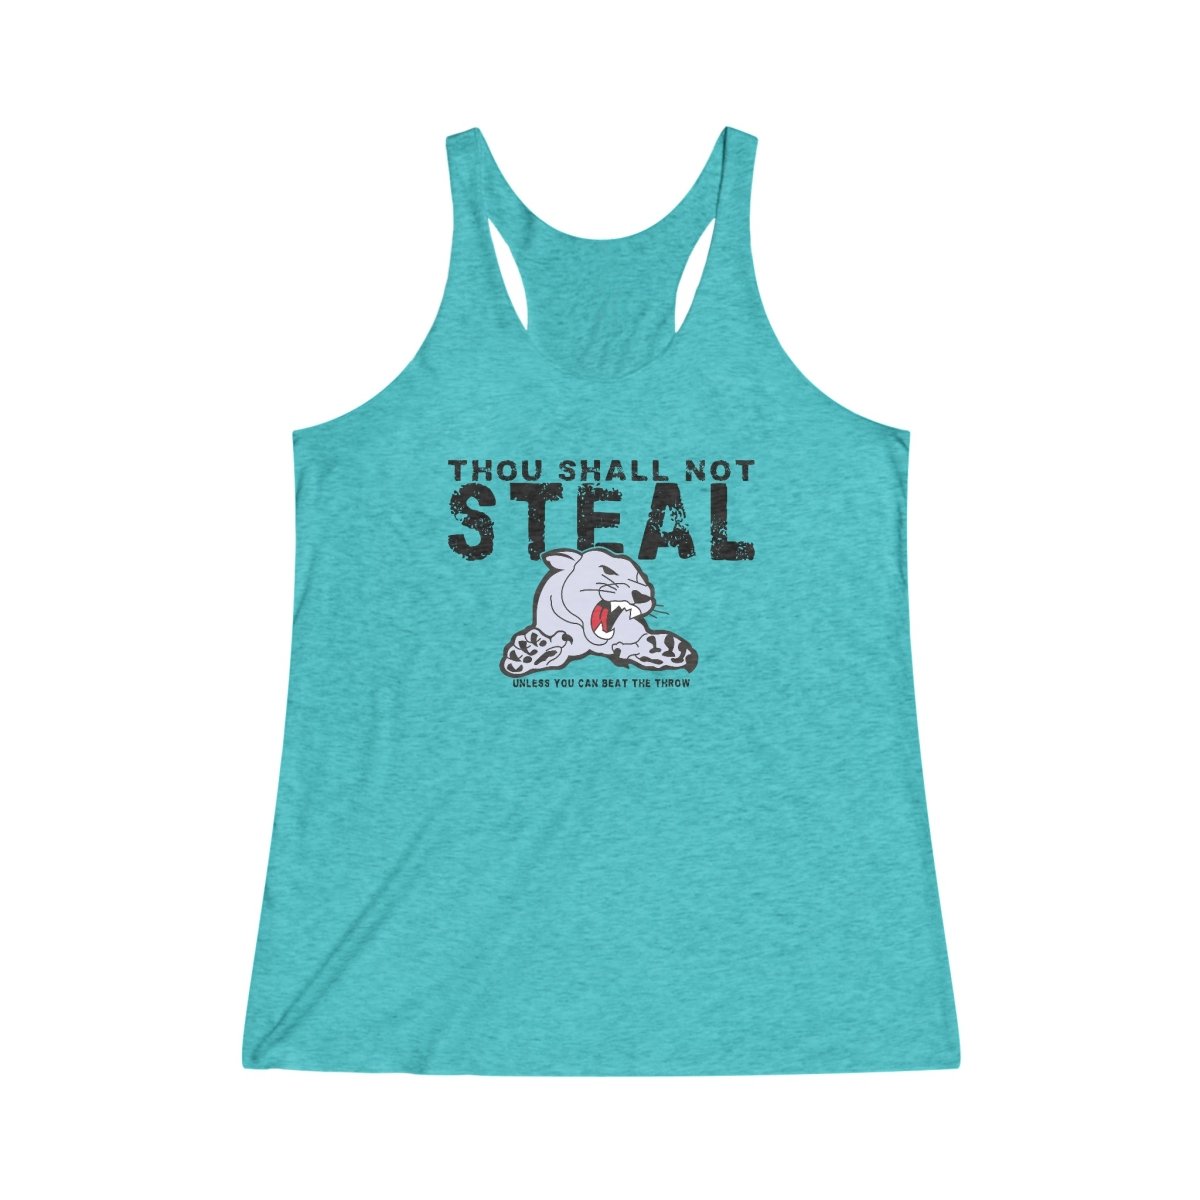 Cougars Shall Not Steal Women's Racerback Tank